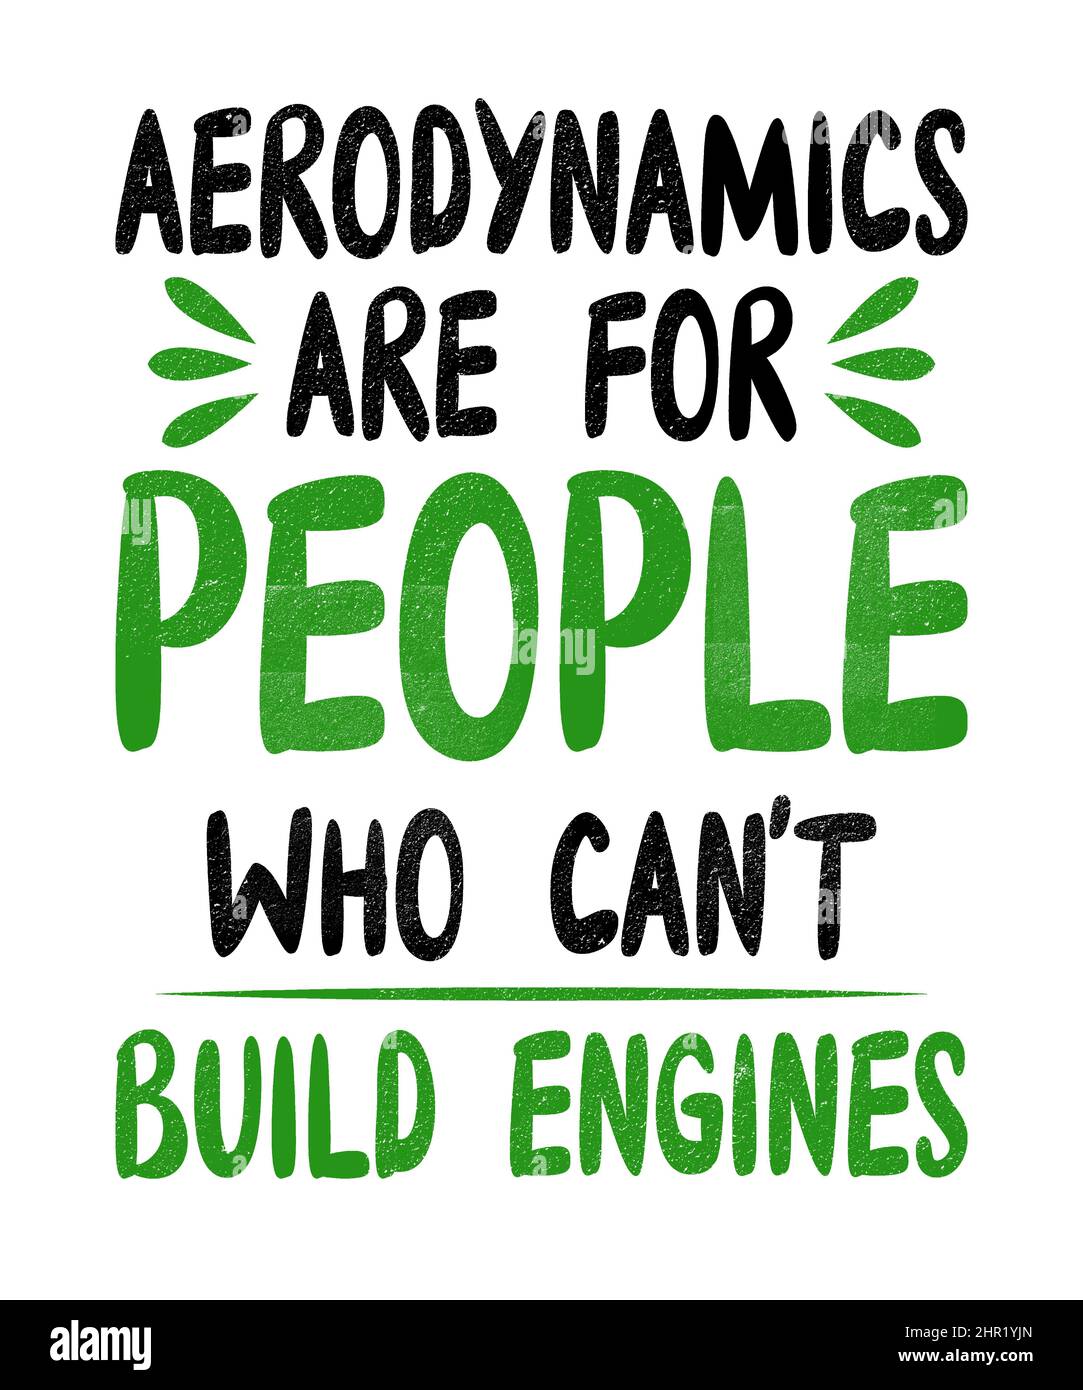 Aerodynamics are for people who cant build engines quote for mechanics, machinists and people in the machining industry in a grunge text white. Stock Photo